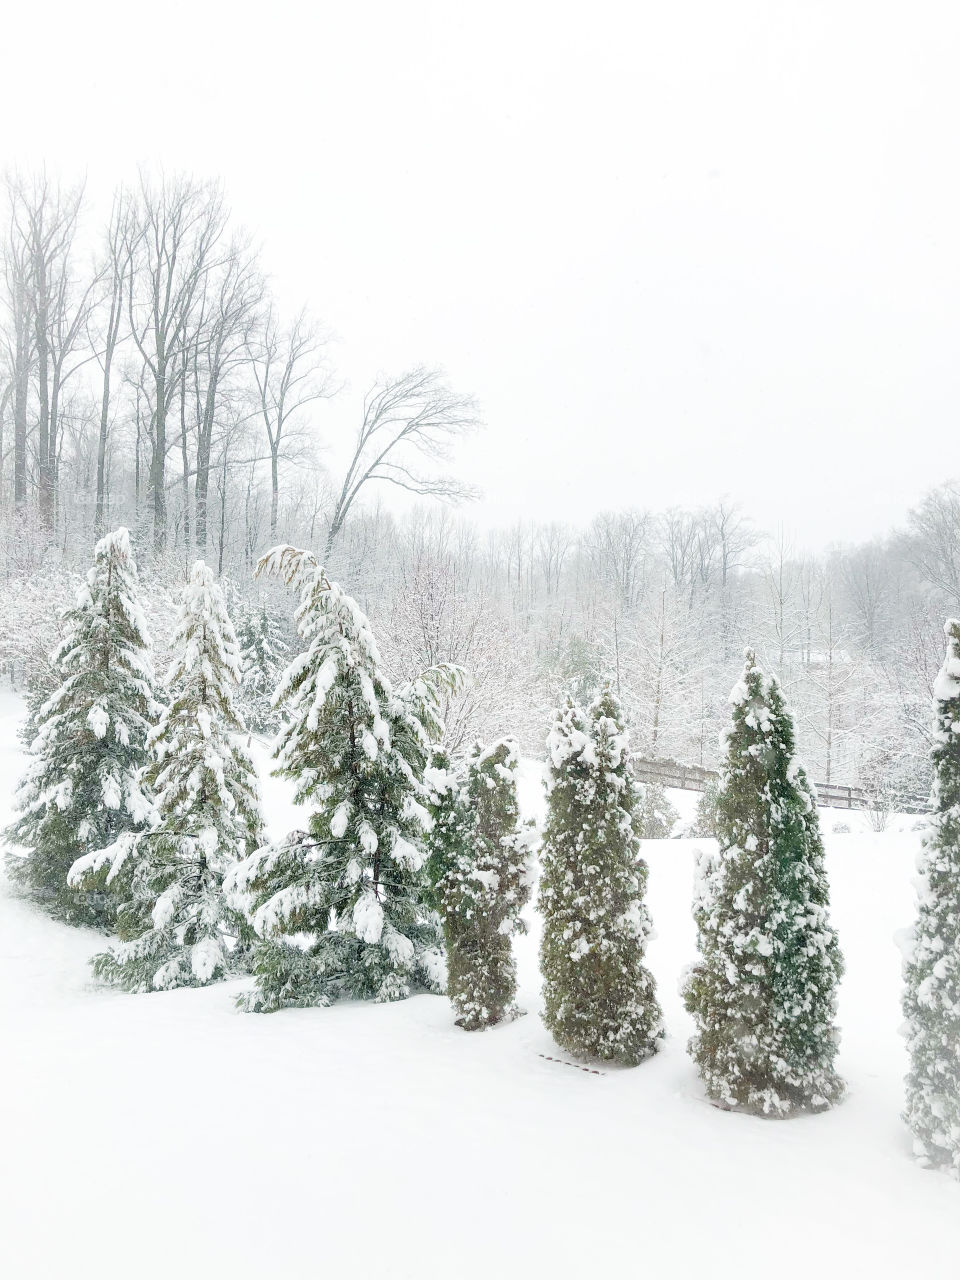 Line of snow covered evergreen trees in Fairfax, Virginia. 